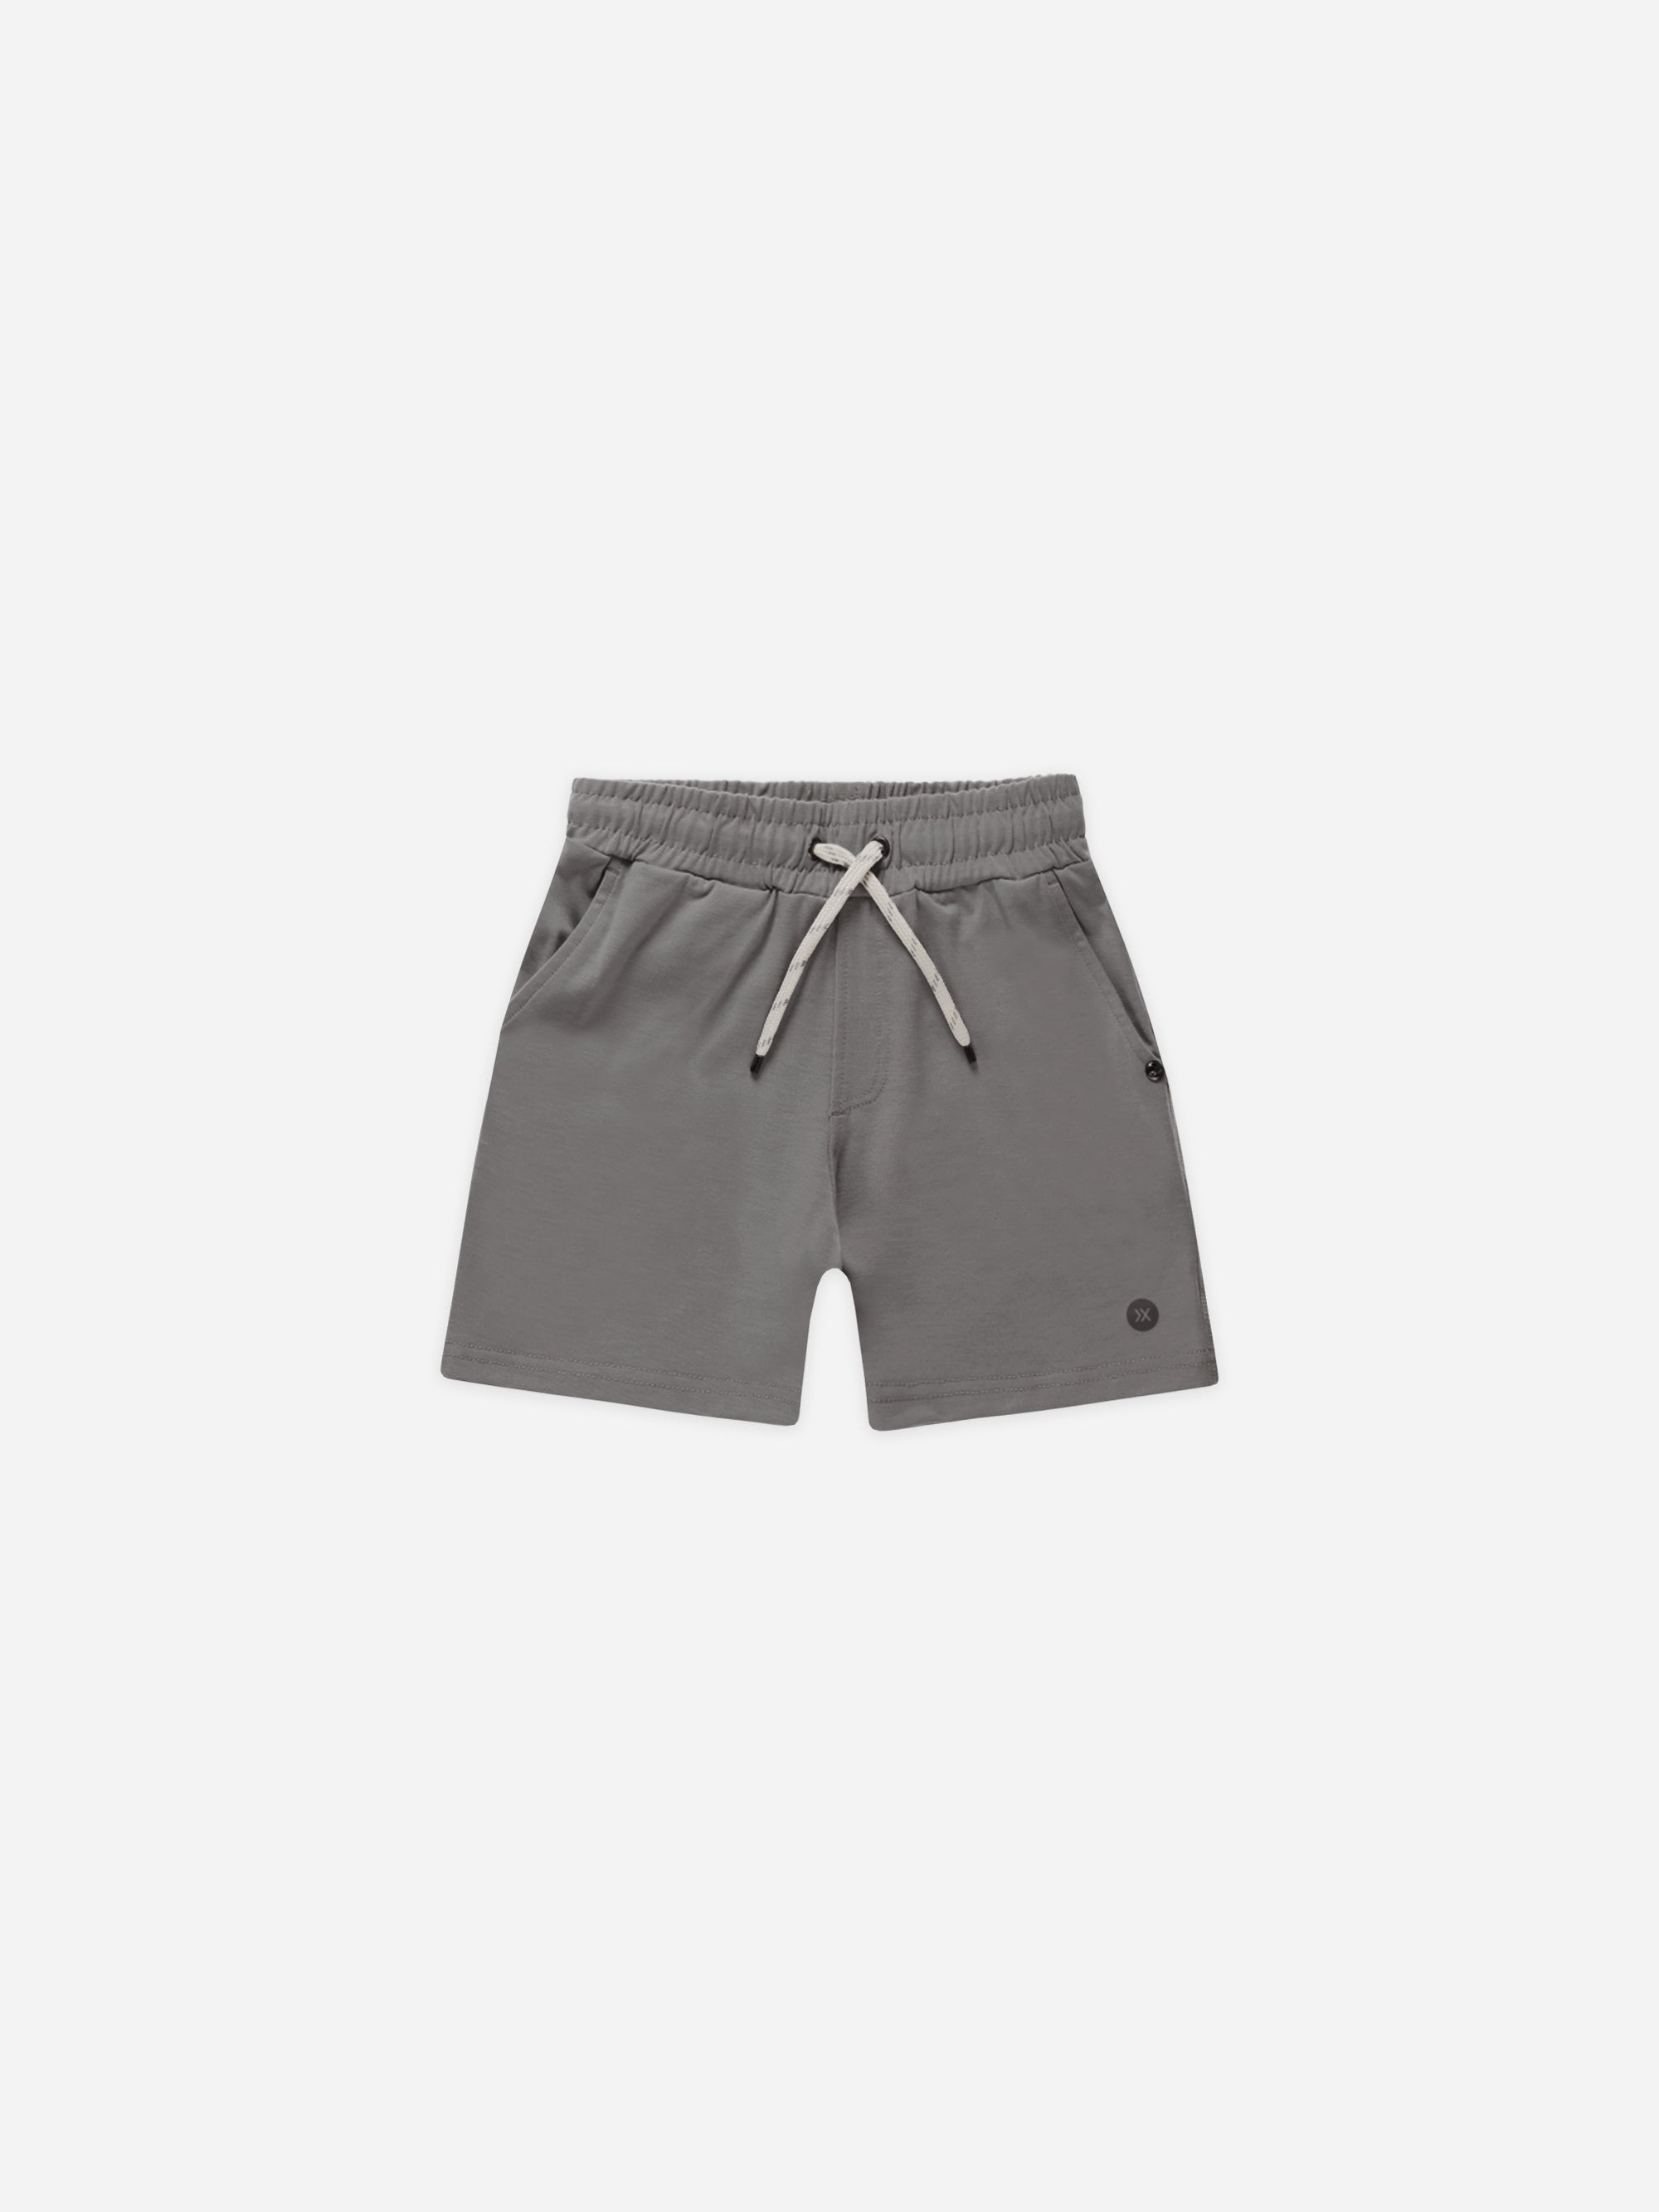 Oceanside Tech Short || Grey - Rylee + Cru | Kids Clothes | Trendy Baby Clothes | Modern Infant Outfits |